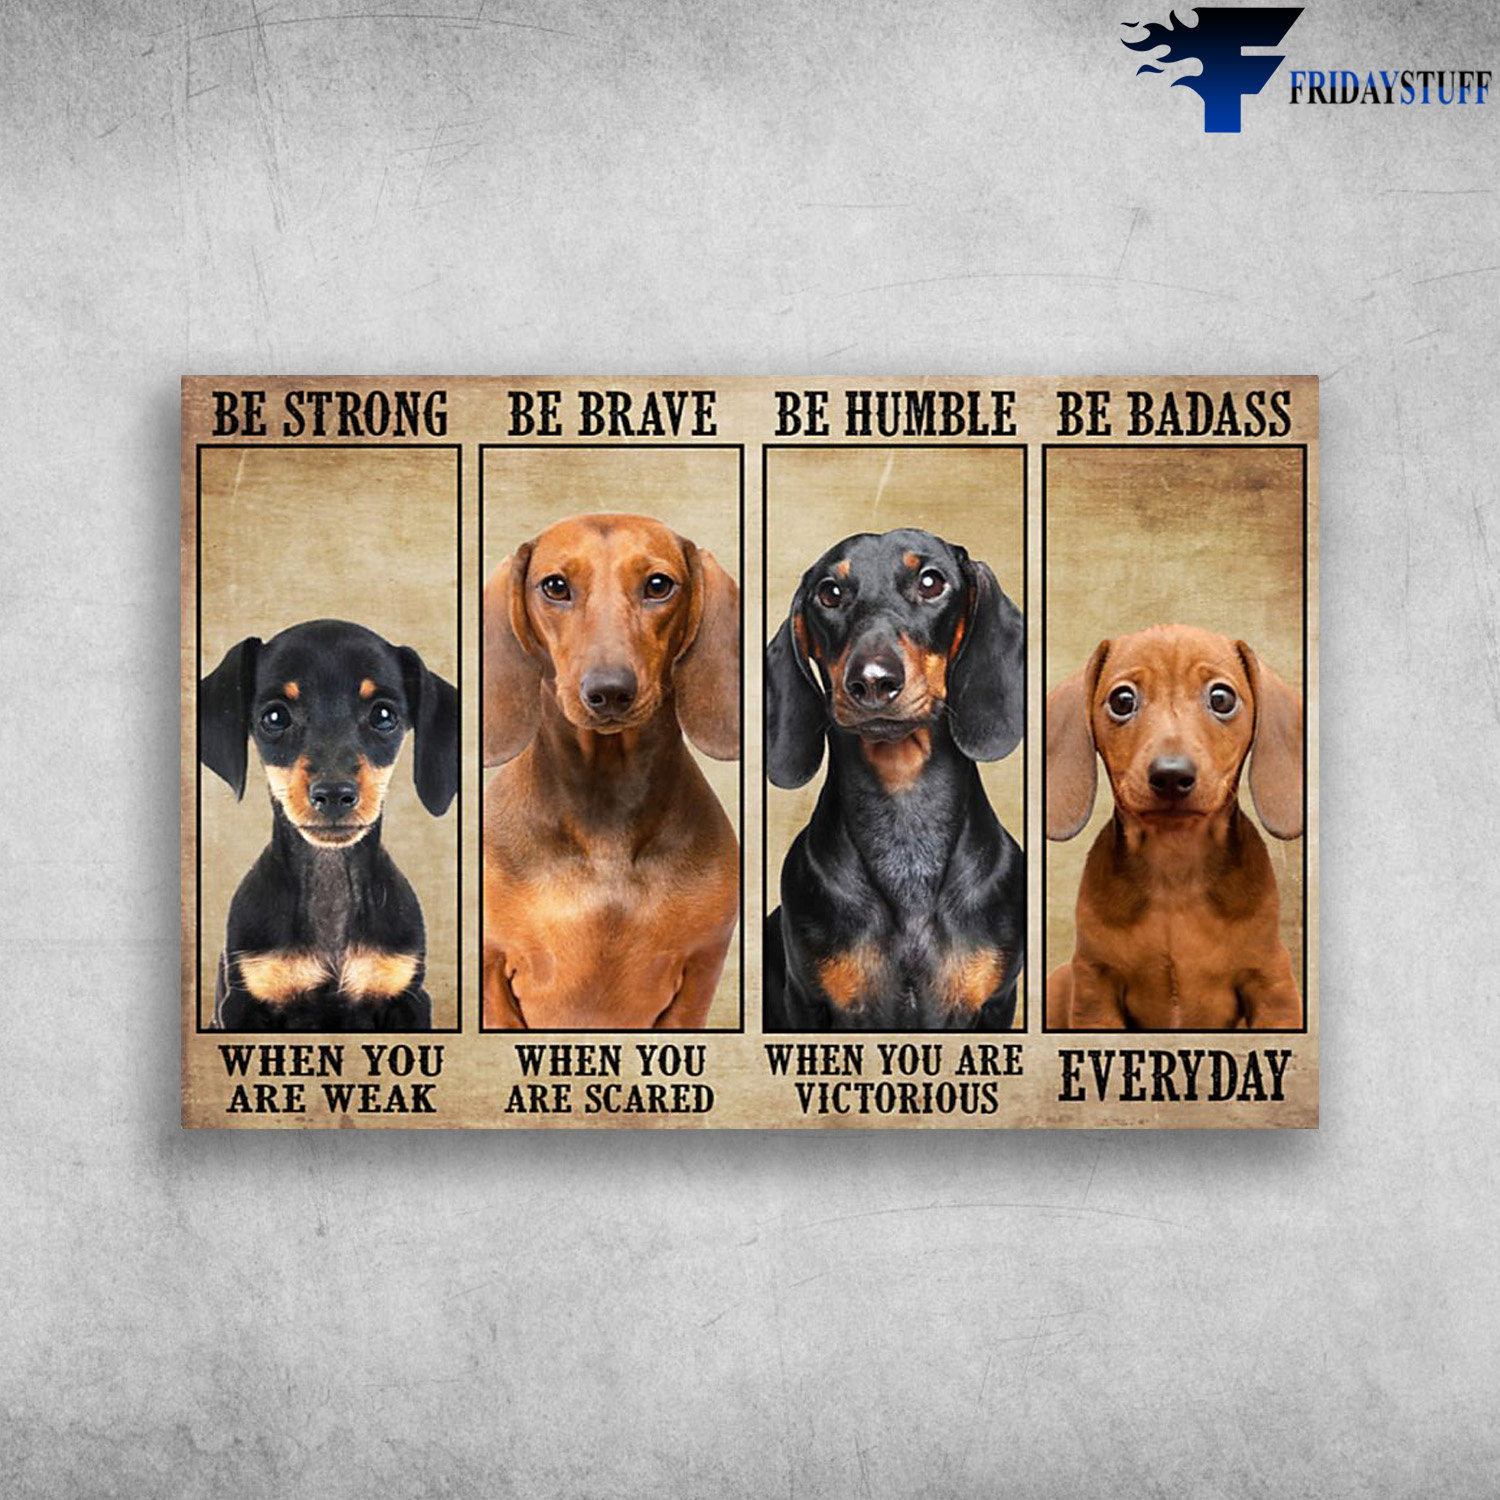 Dachshund Dog - Be Strong When You Are Weak, Be Brave When You Are Scared, Be Humble When You Are Victorious, Be Badass Everyday